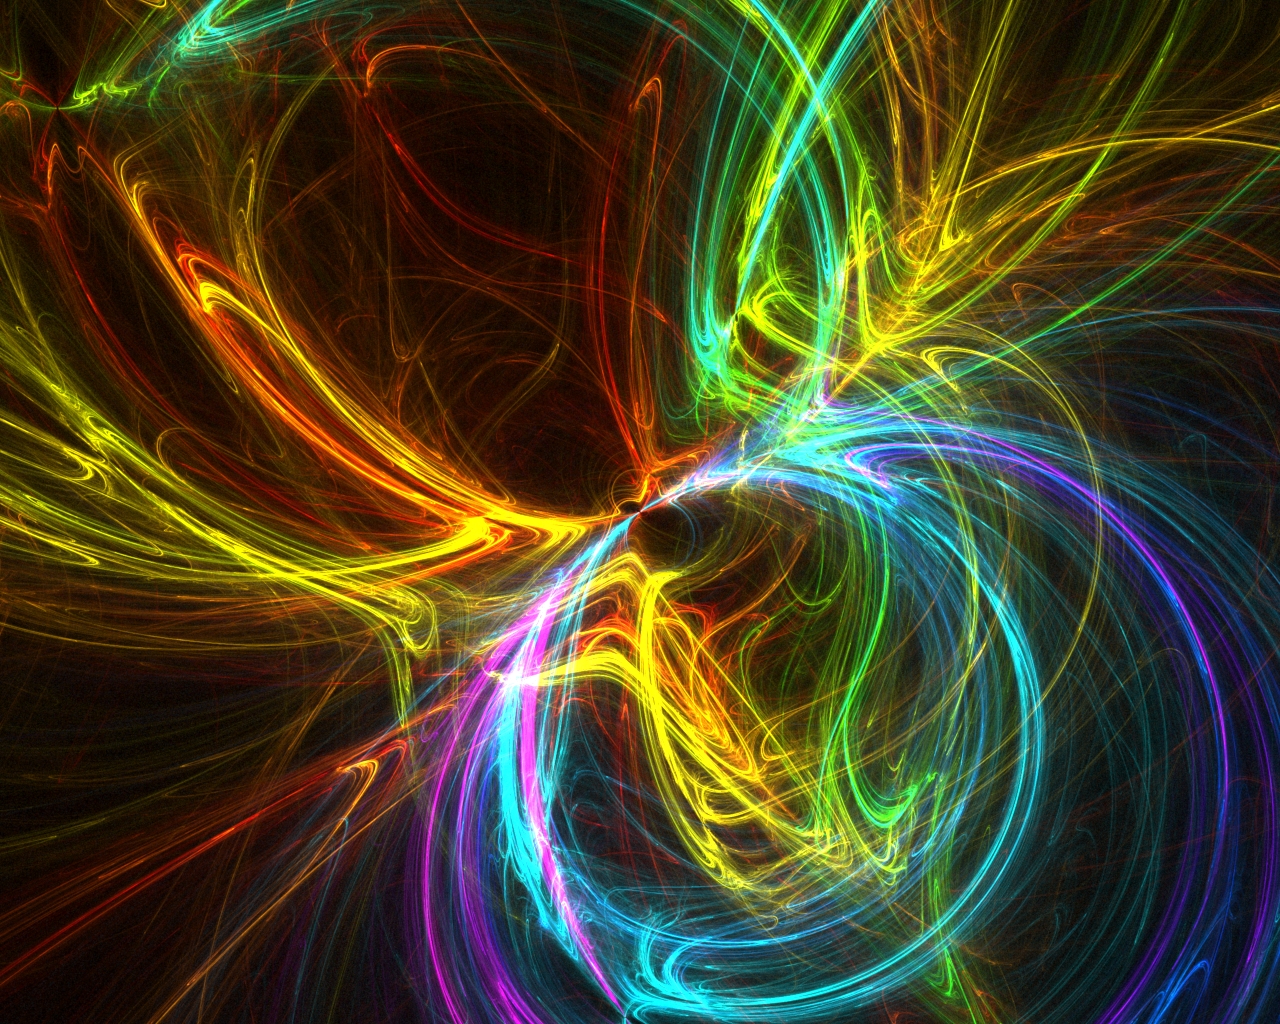 September 2012 | Abstract Graphic Wallpaper